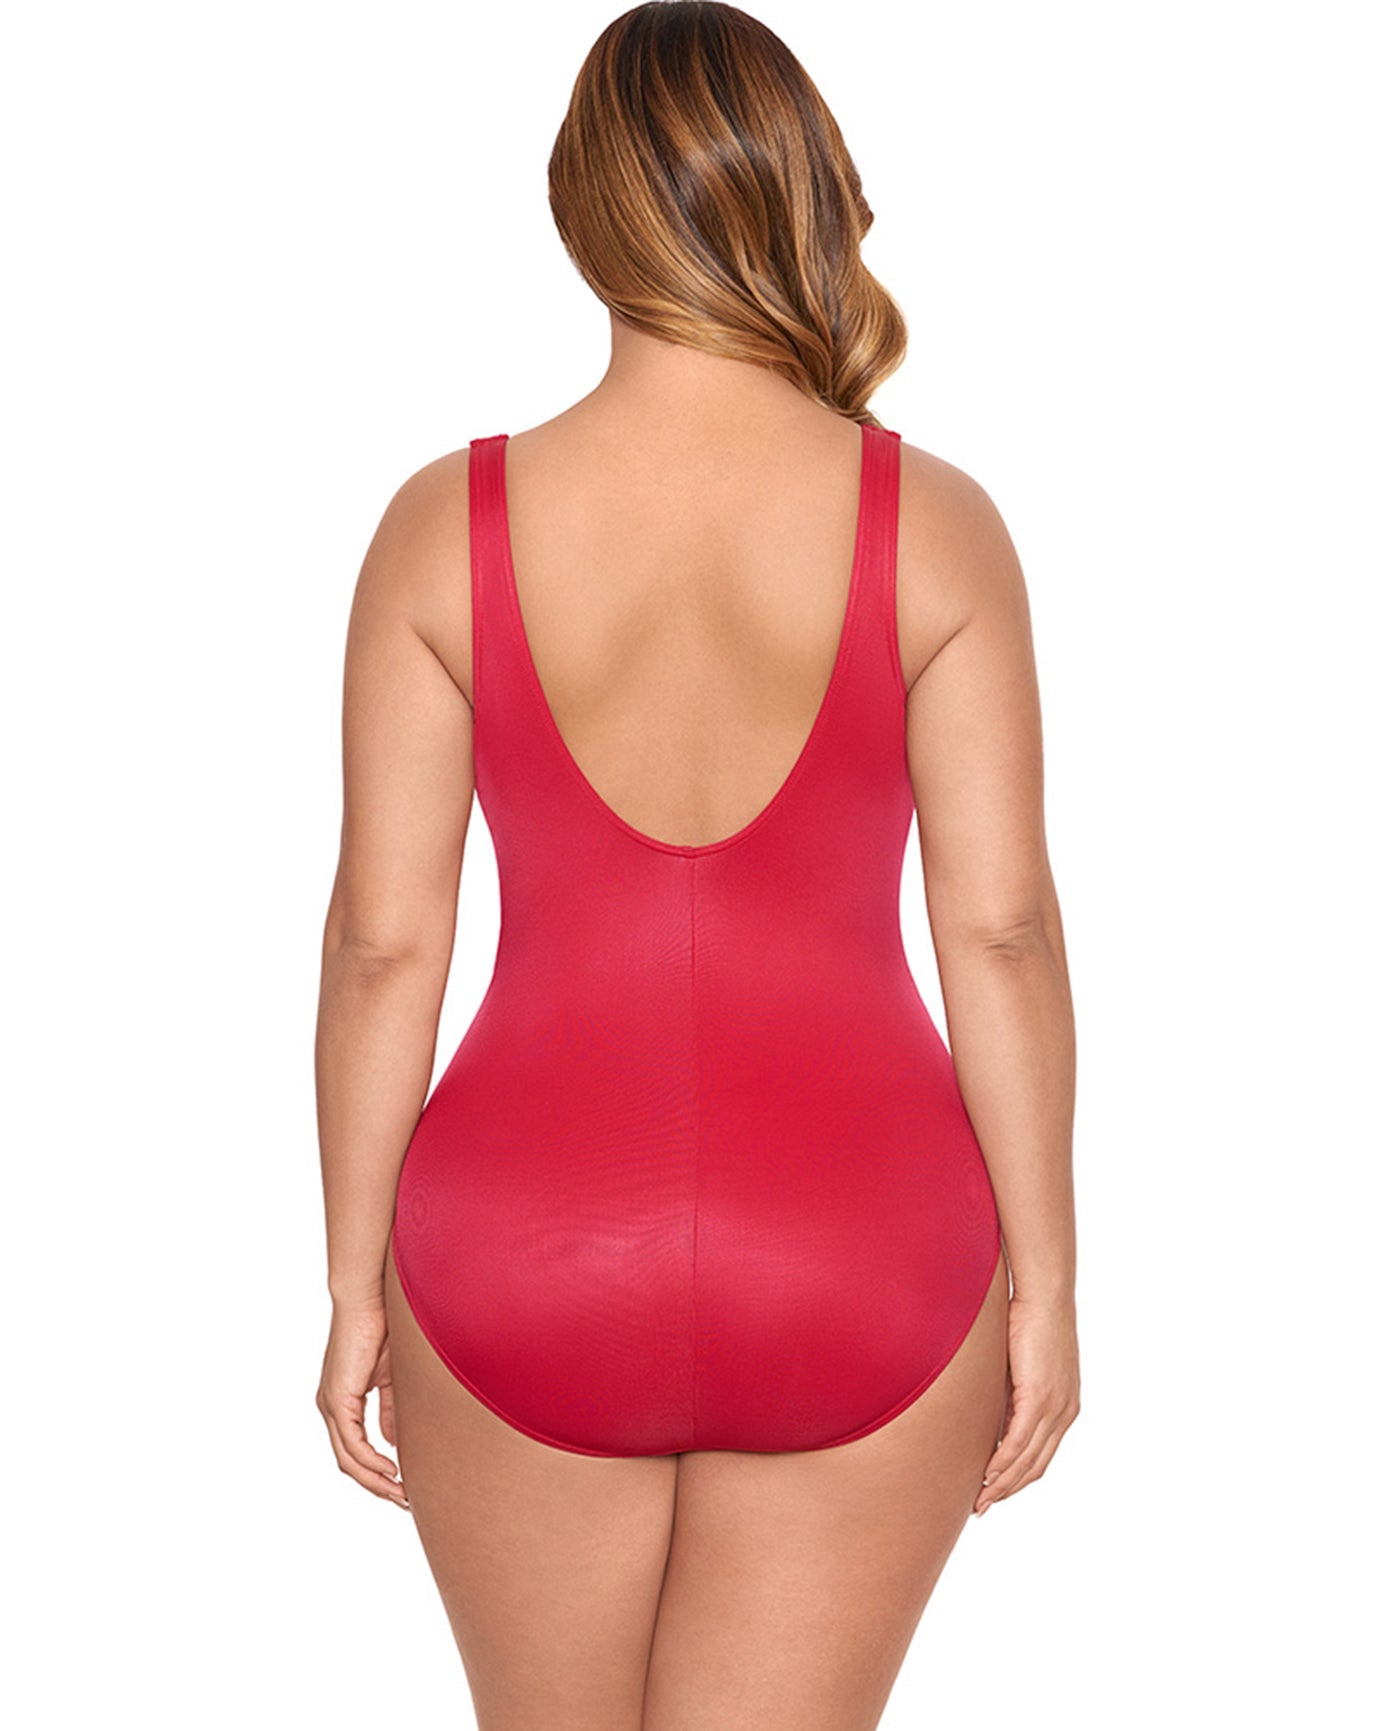 Back View Of Miraclesuit Black Plus Size Escape Underwire One Piece Swimsuit | MIR Red